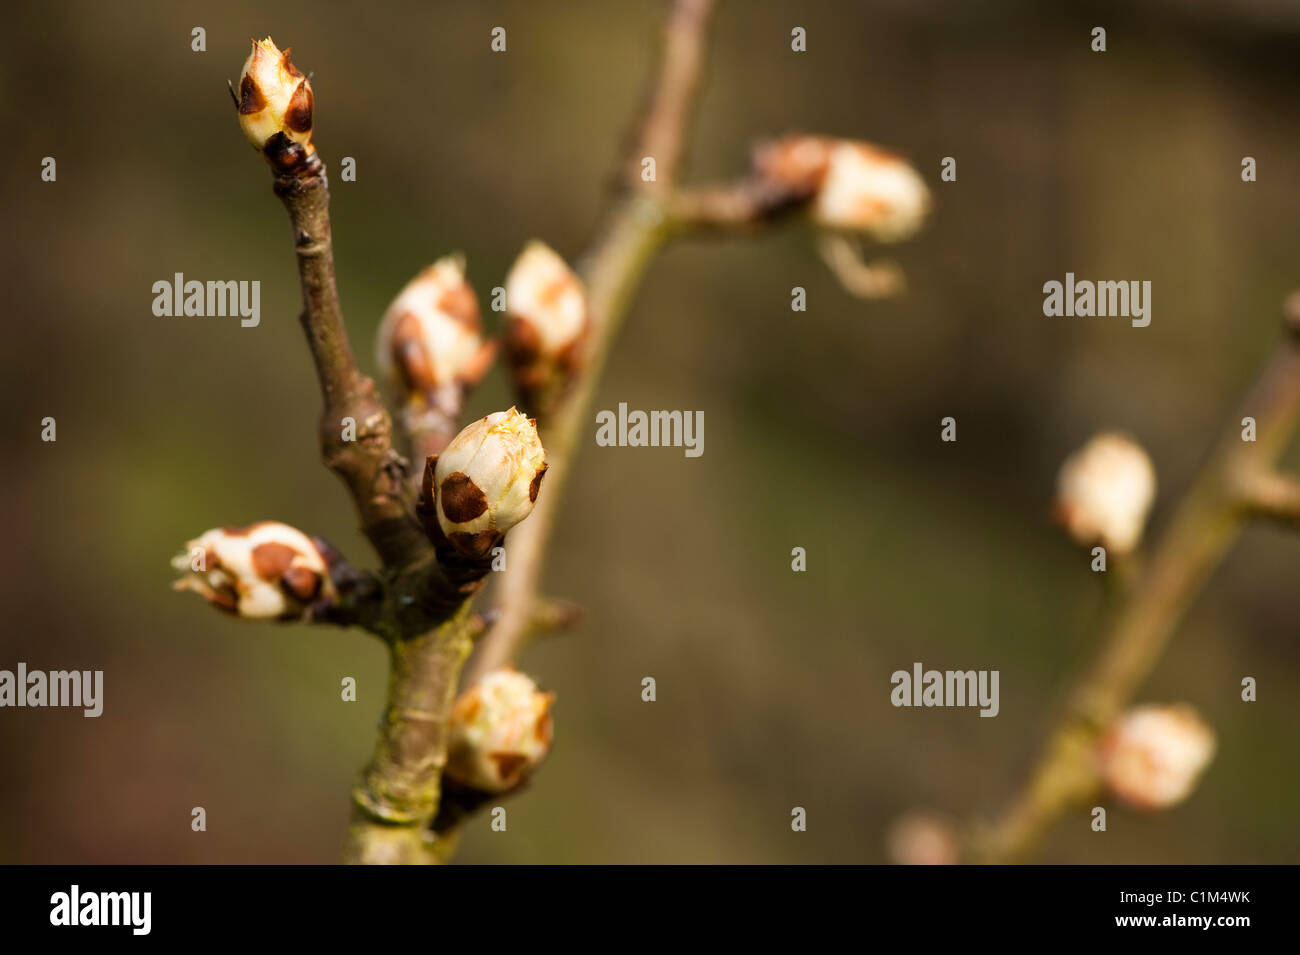 Spring buds of a Pear, Pyrus communis ‘Chalk’ Stock Photo